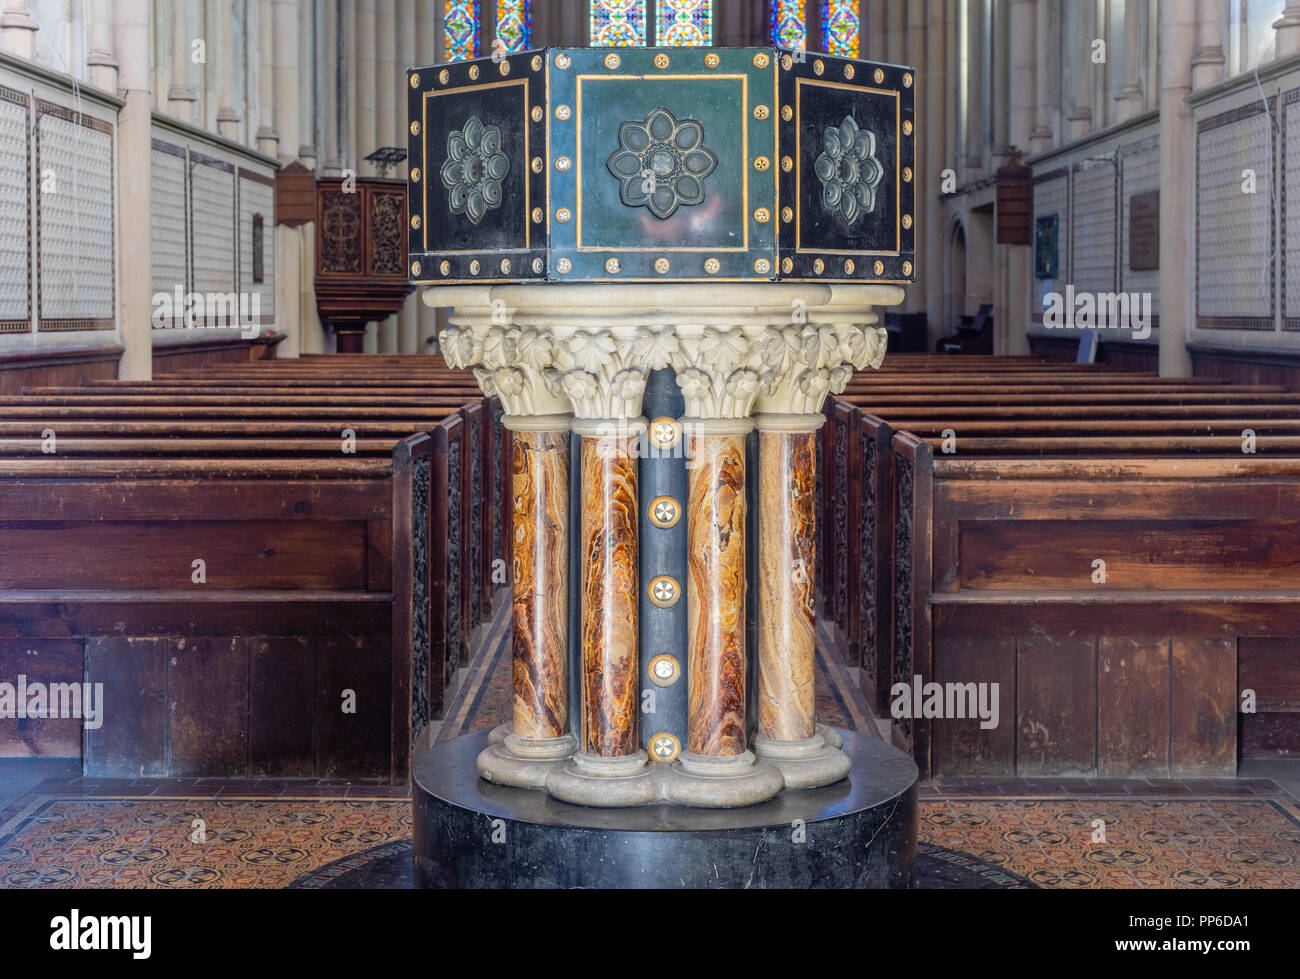 The 13th century baptismal font made of marble inside the St Mary's church Itchen Stoke in New Alresford, Hampshire, England, UK Stock Photo